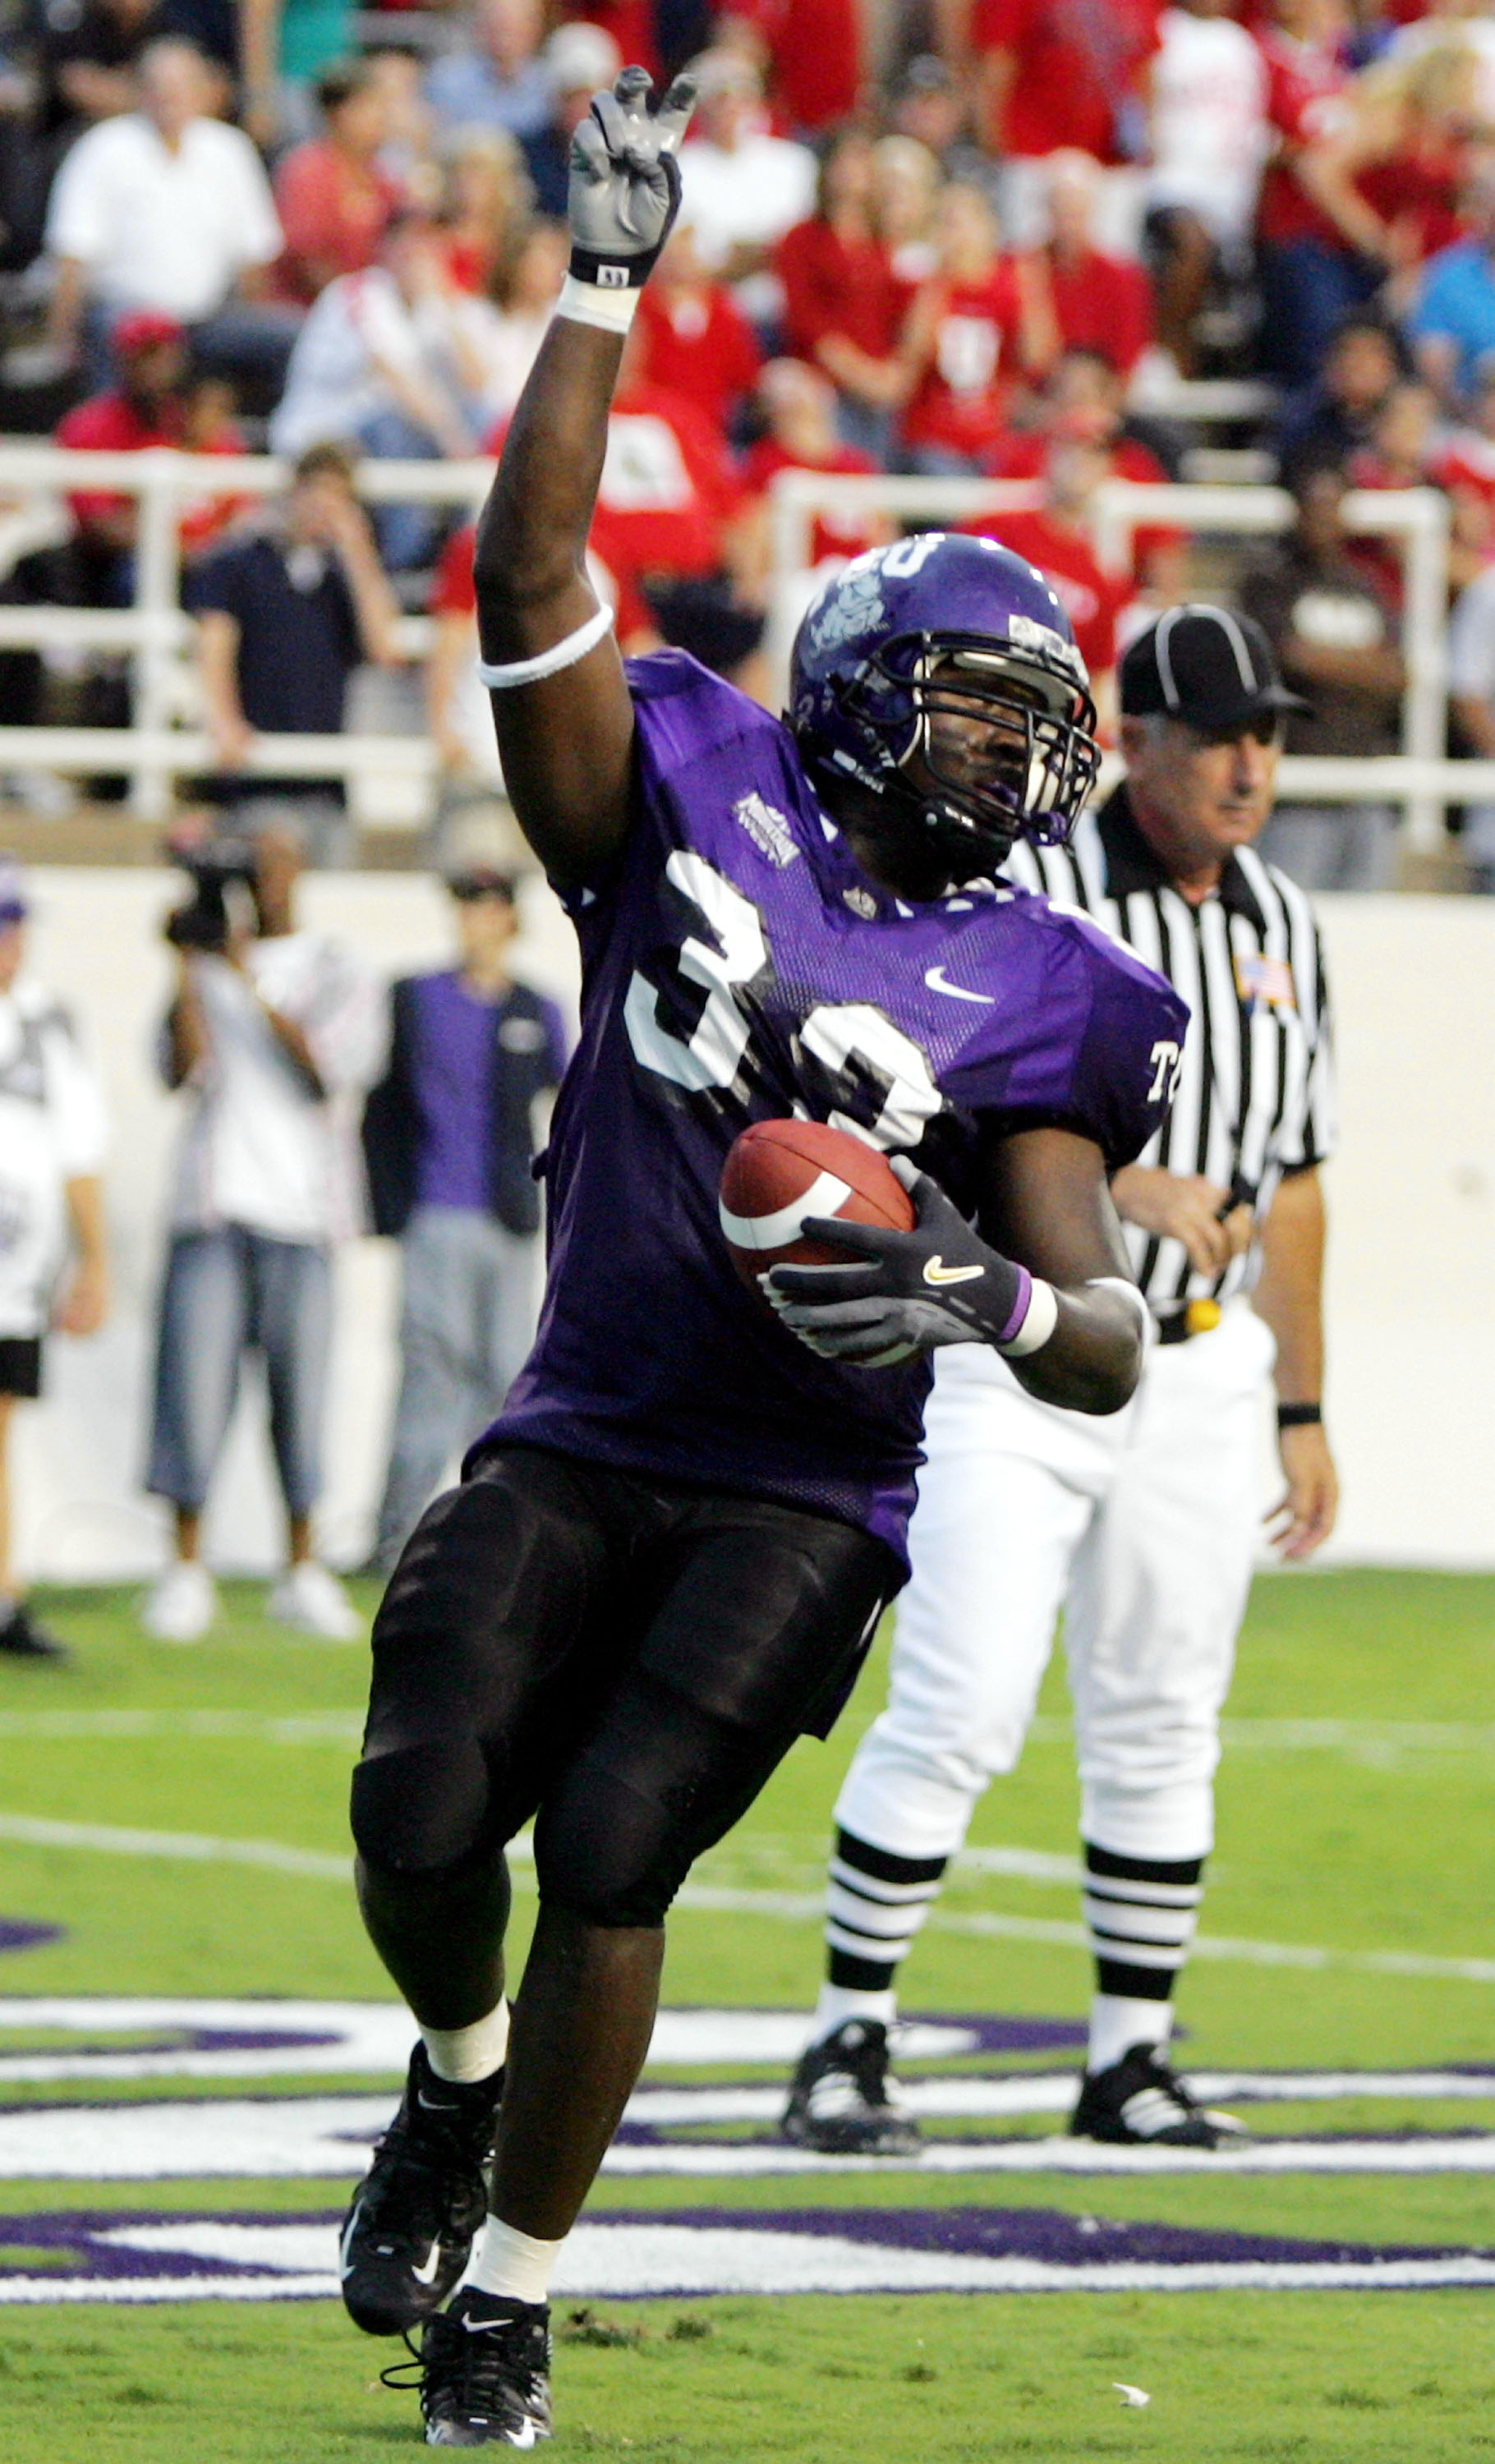 FORT WORTH, TX - SEPTEMBER 15:  Robert Merrill #33 of the Texas Christian University Horned Frogs runs for a touchdown against the Utah Utes on September 15, 2005 at Amon Carter Stadium in Fort Worth, Texas.  (Photo by Ronald Martinez/Getty Images)